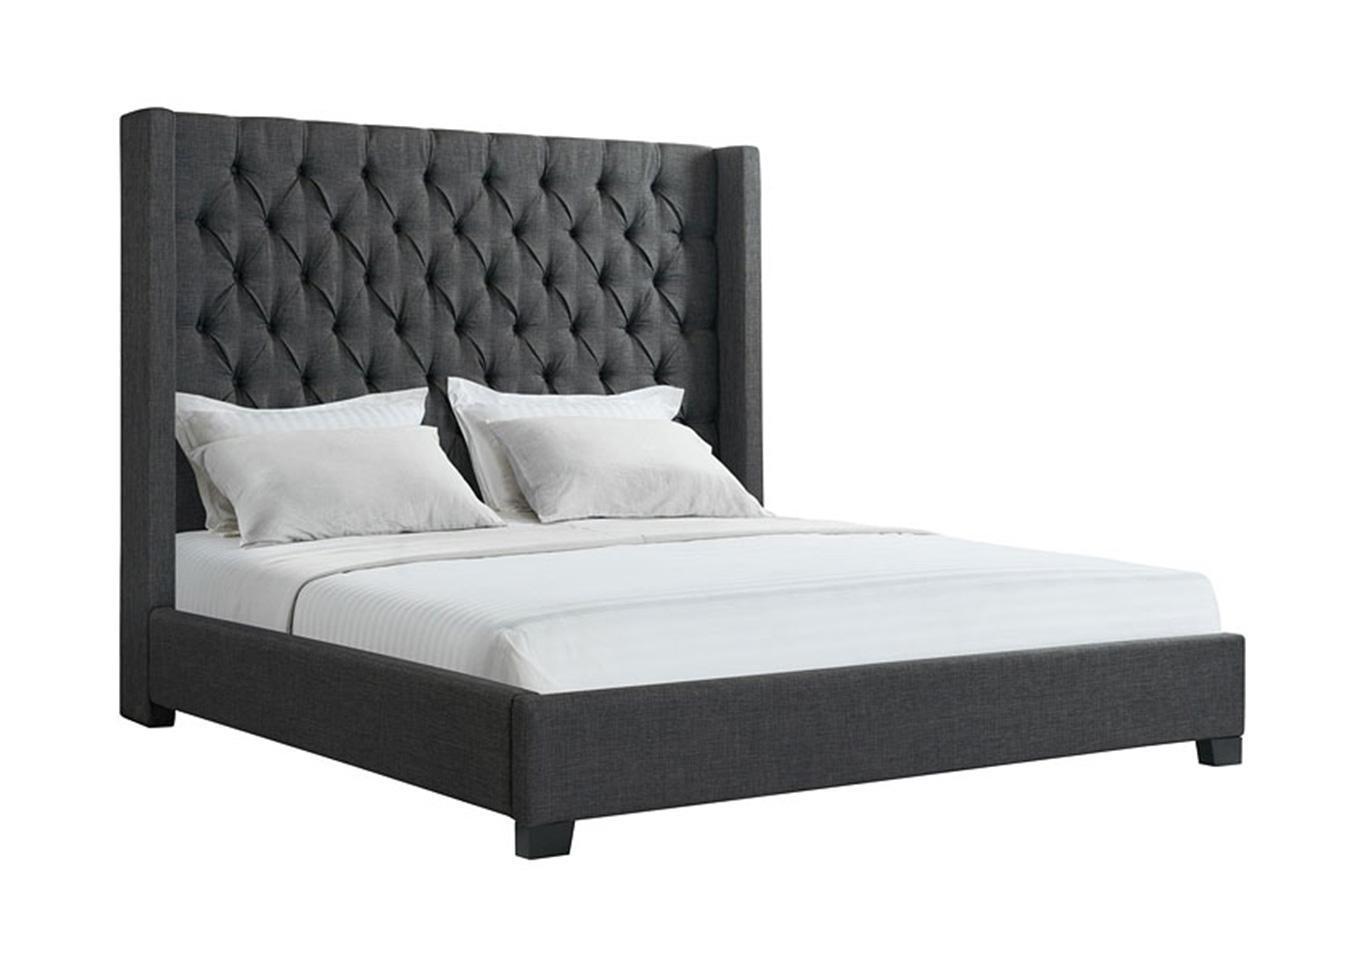 Charcoal King Upholstered Bed,Overstock Liquidation 2022